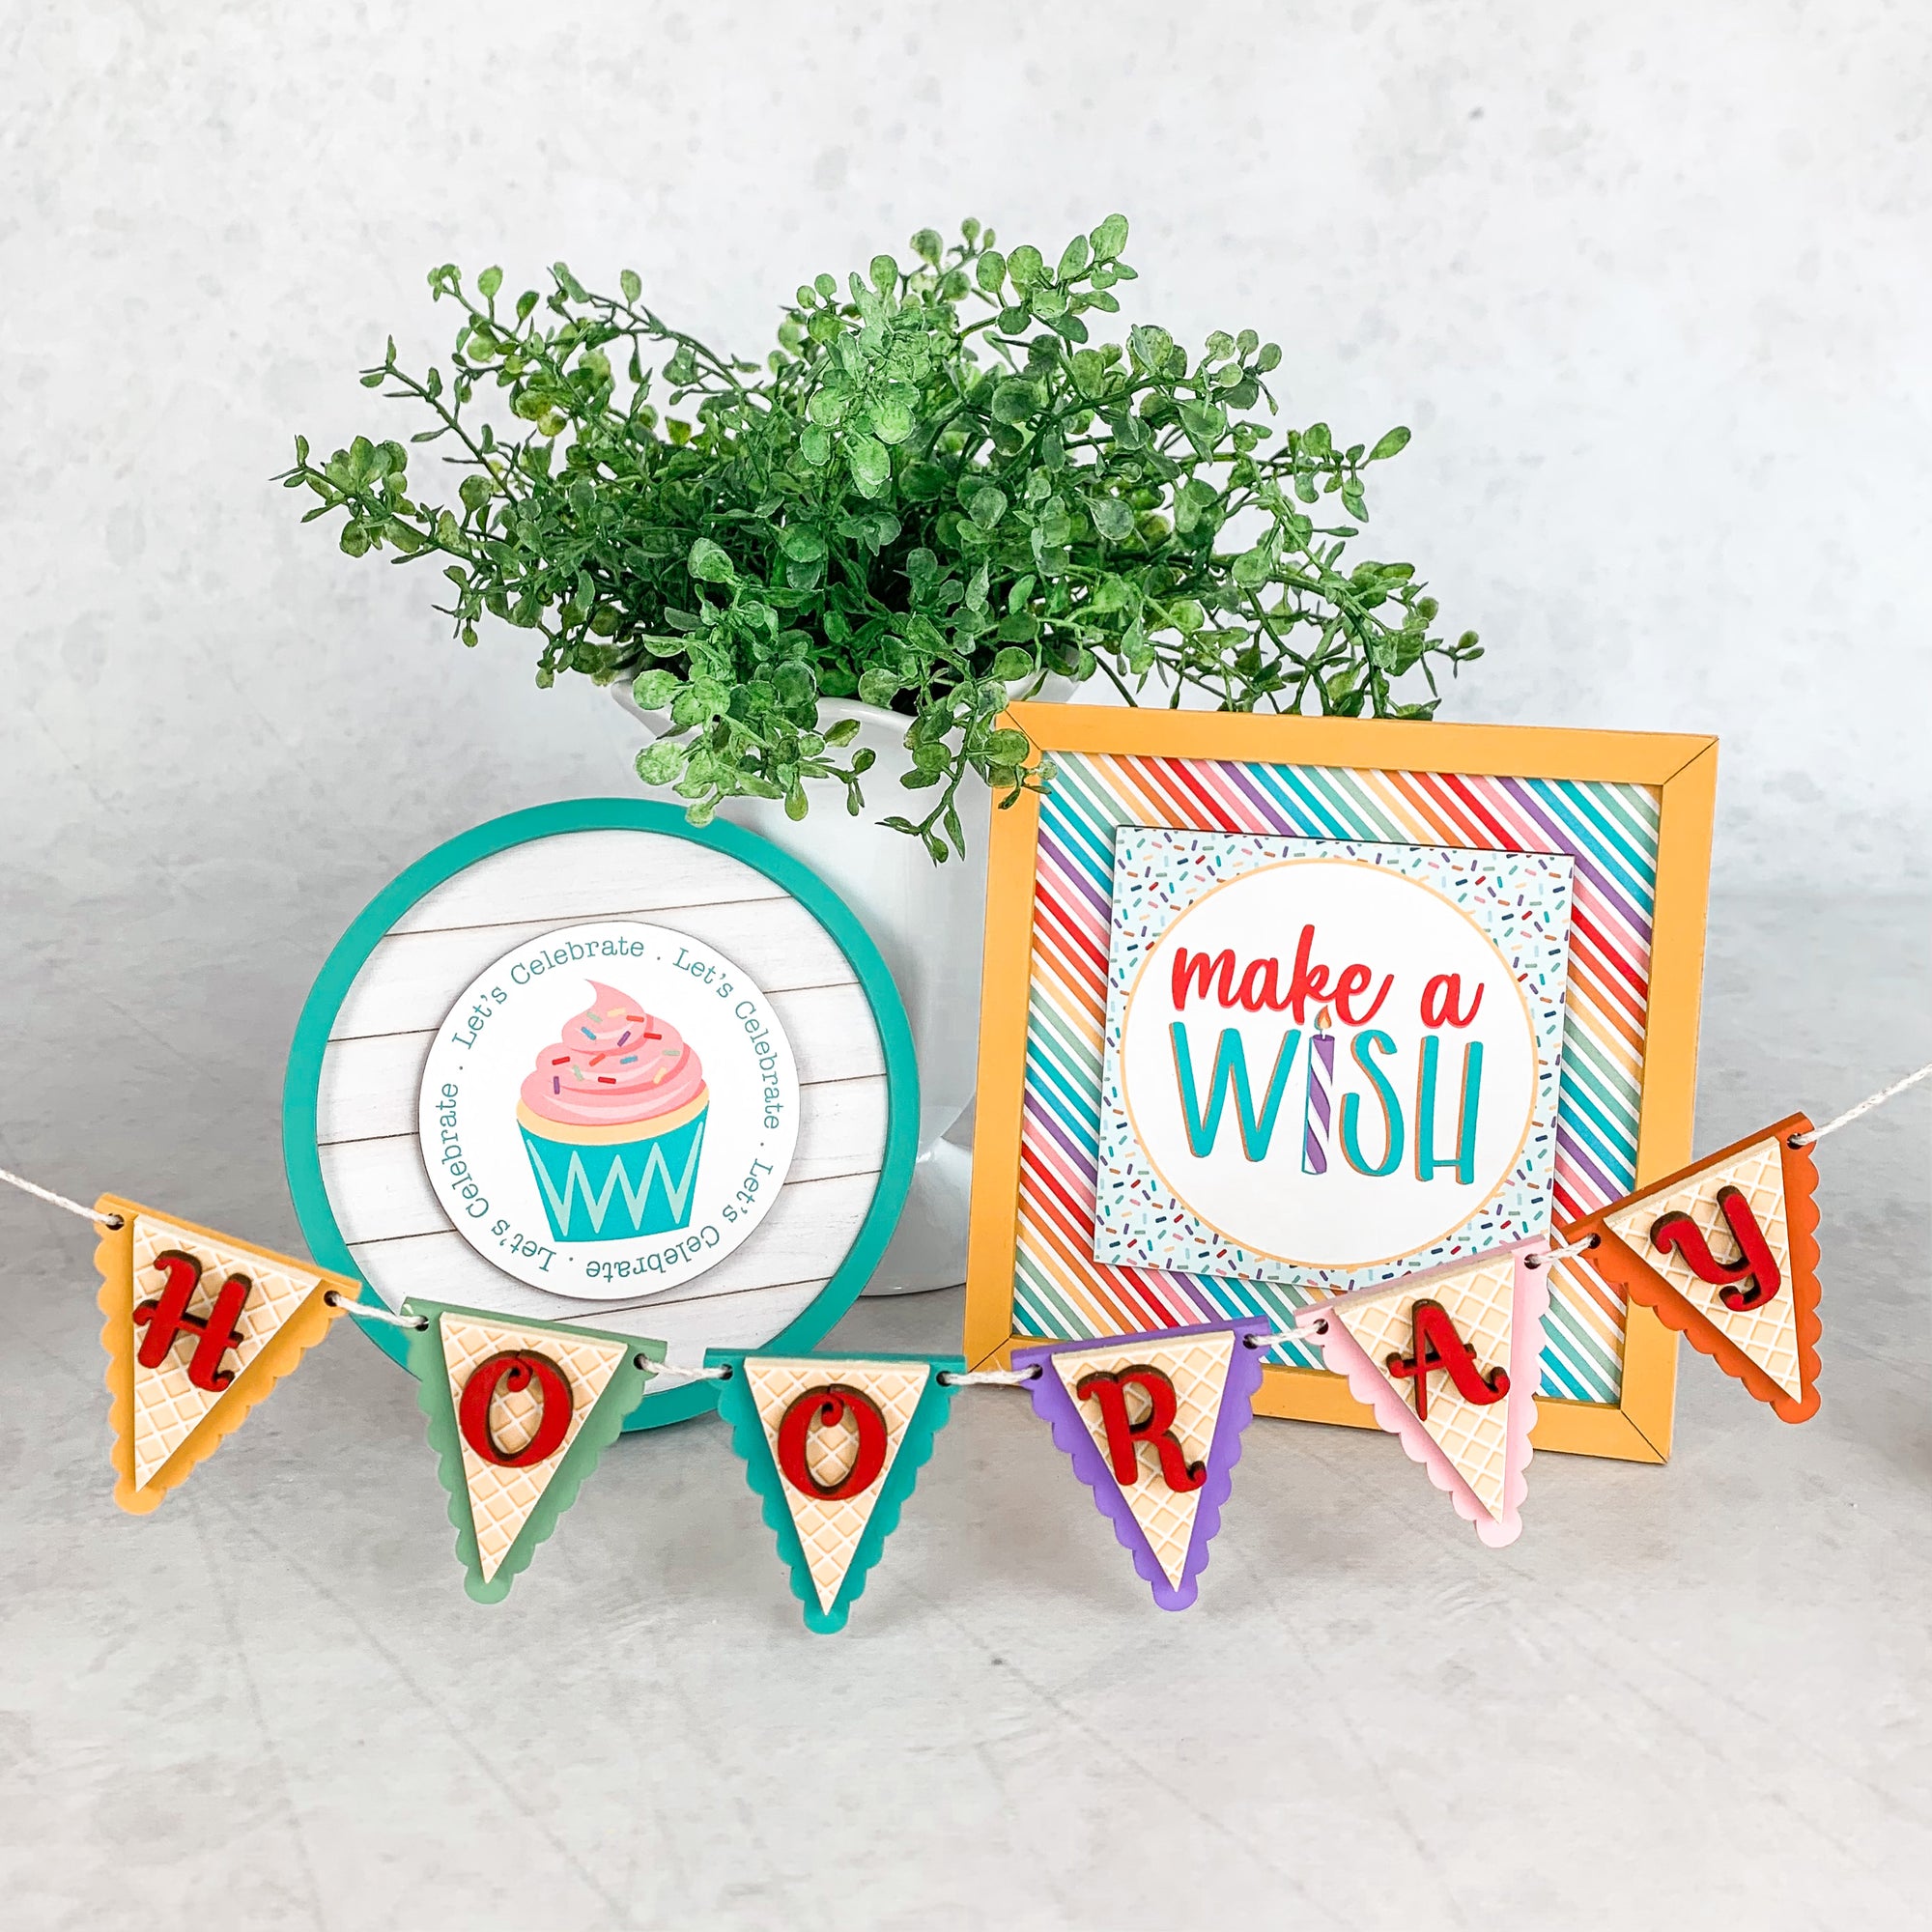 Birthday Hooray banner with birthday shiplap sign and make a wish sign. Birthday signs and banner for styling tiered trays, mantels, and shelves. Birthday party decor. Handmade birthday party ideas.